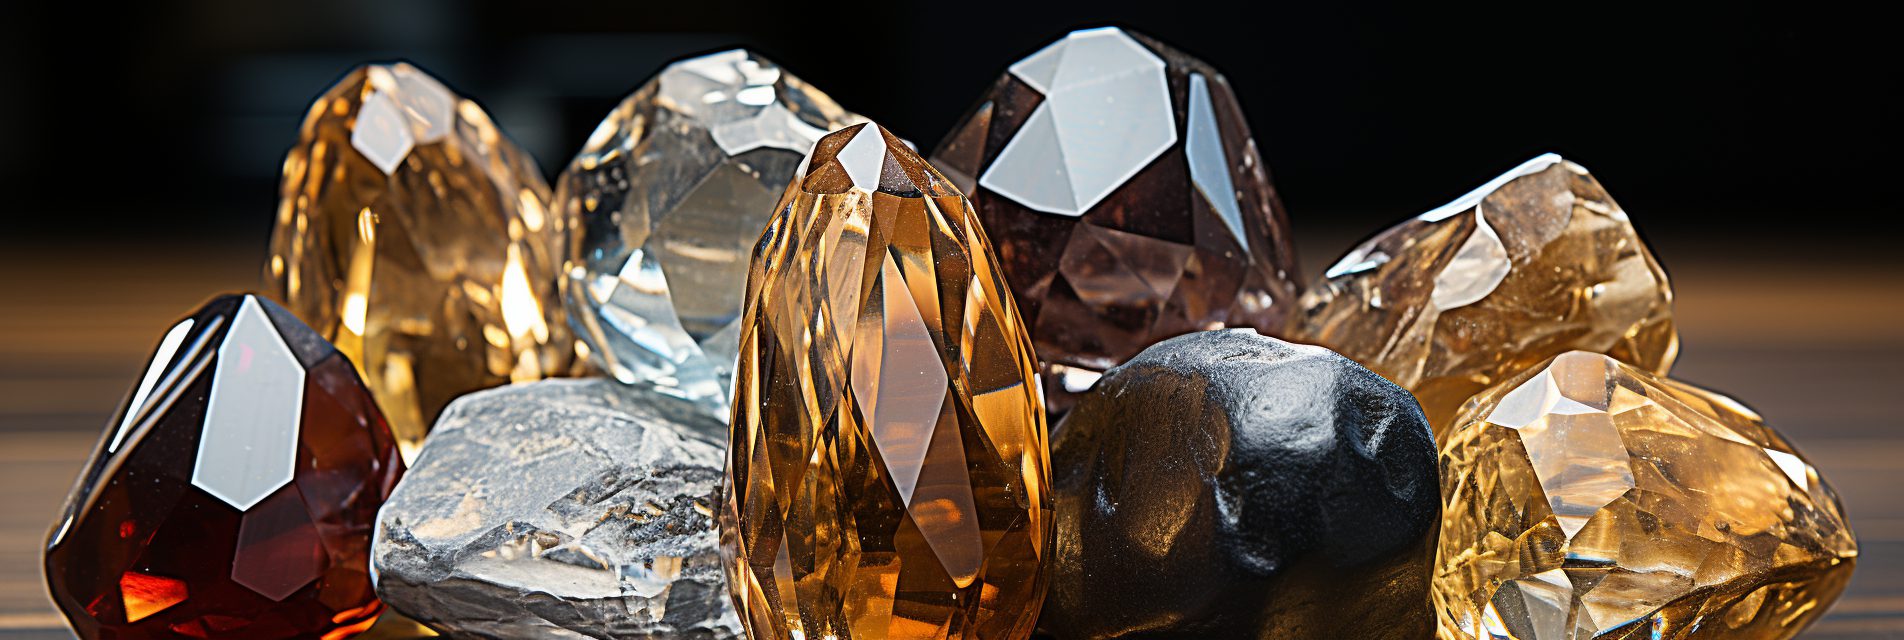 Herkimer Diamond vs Other Crystals and Gemstones